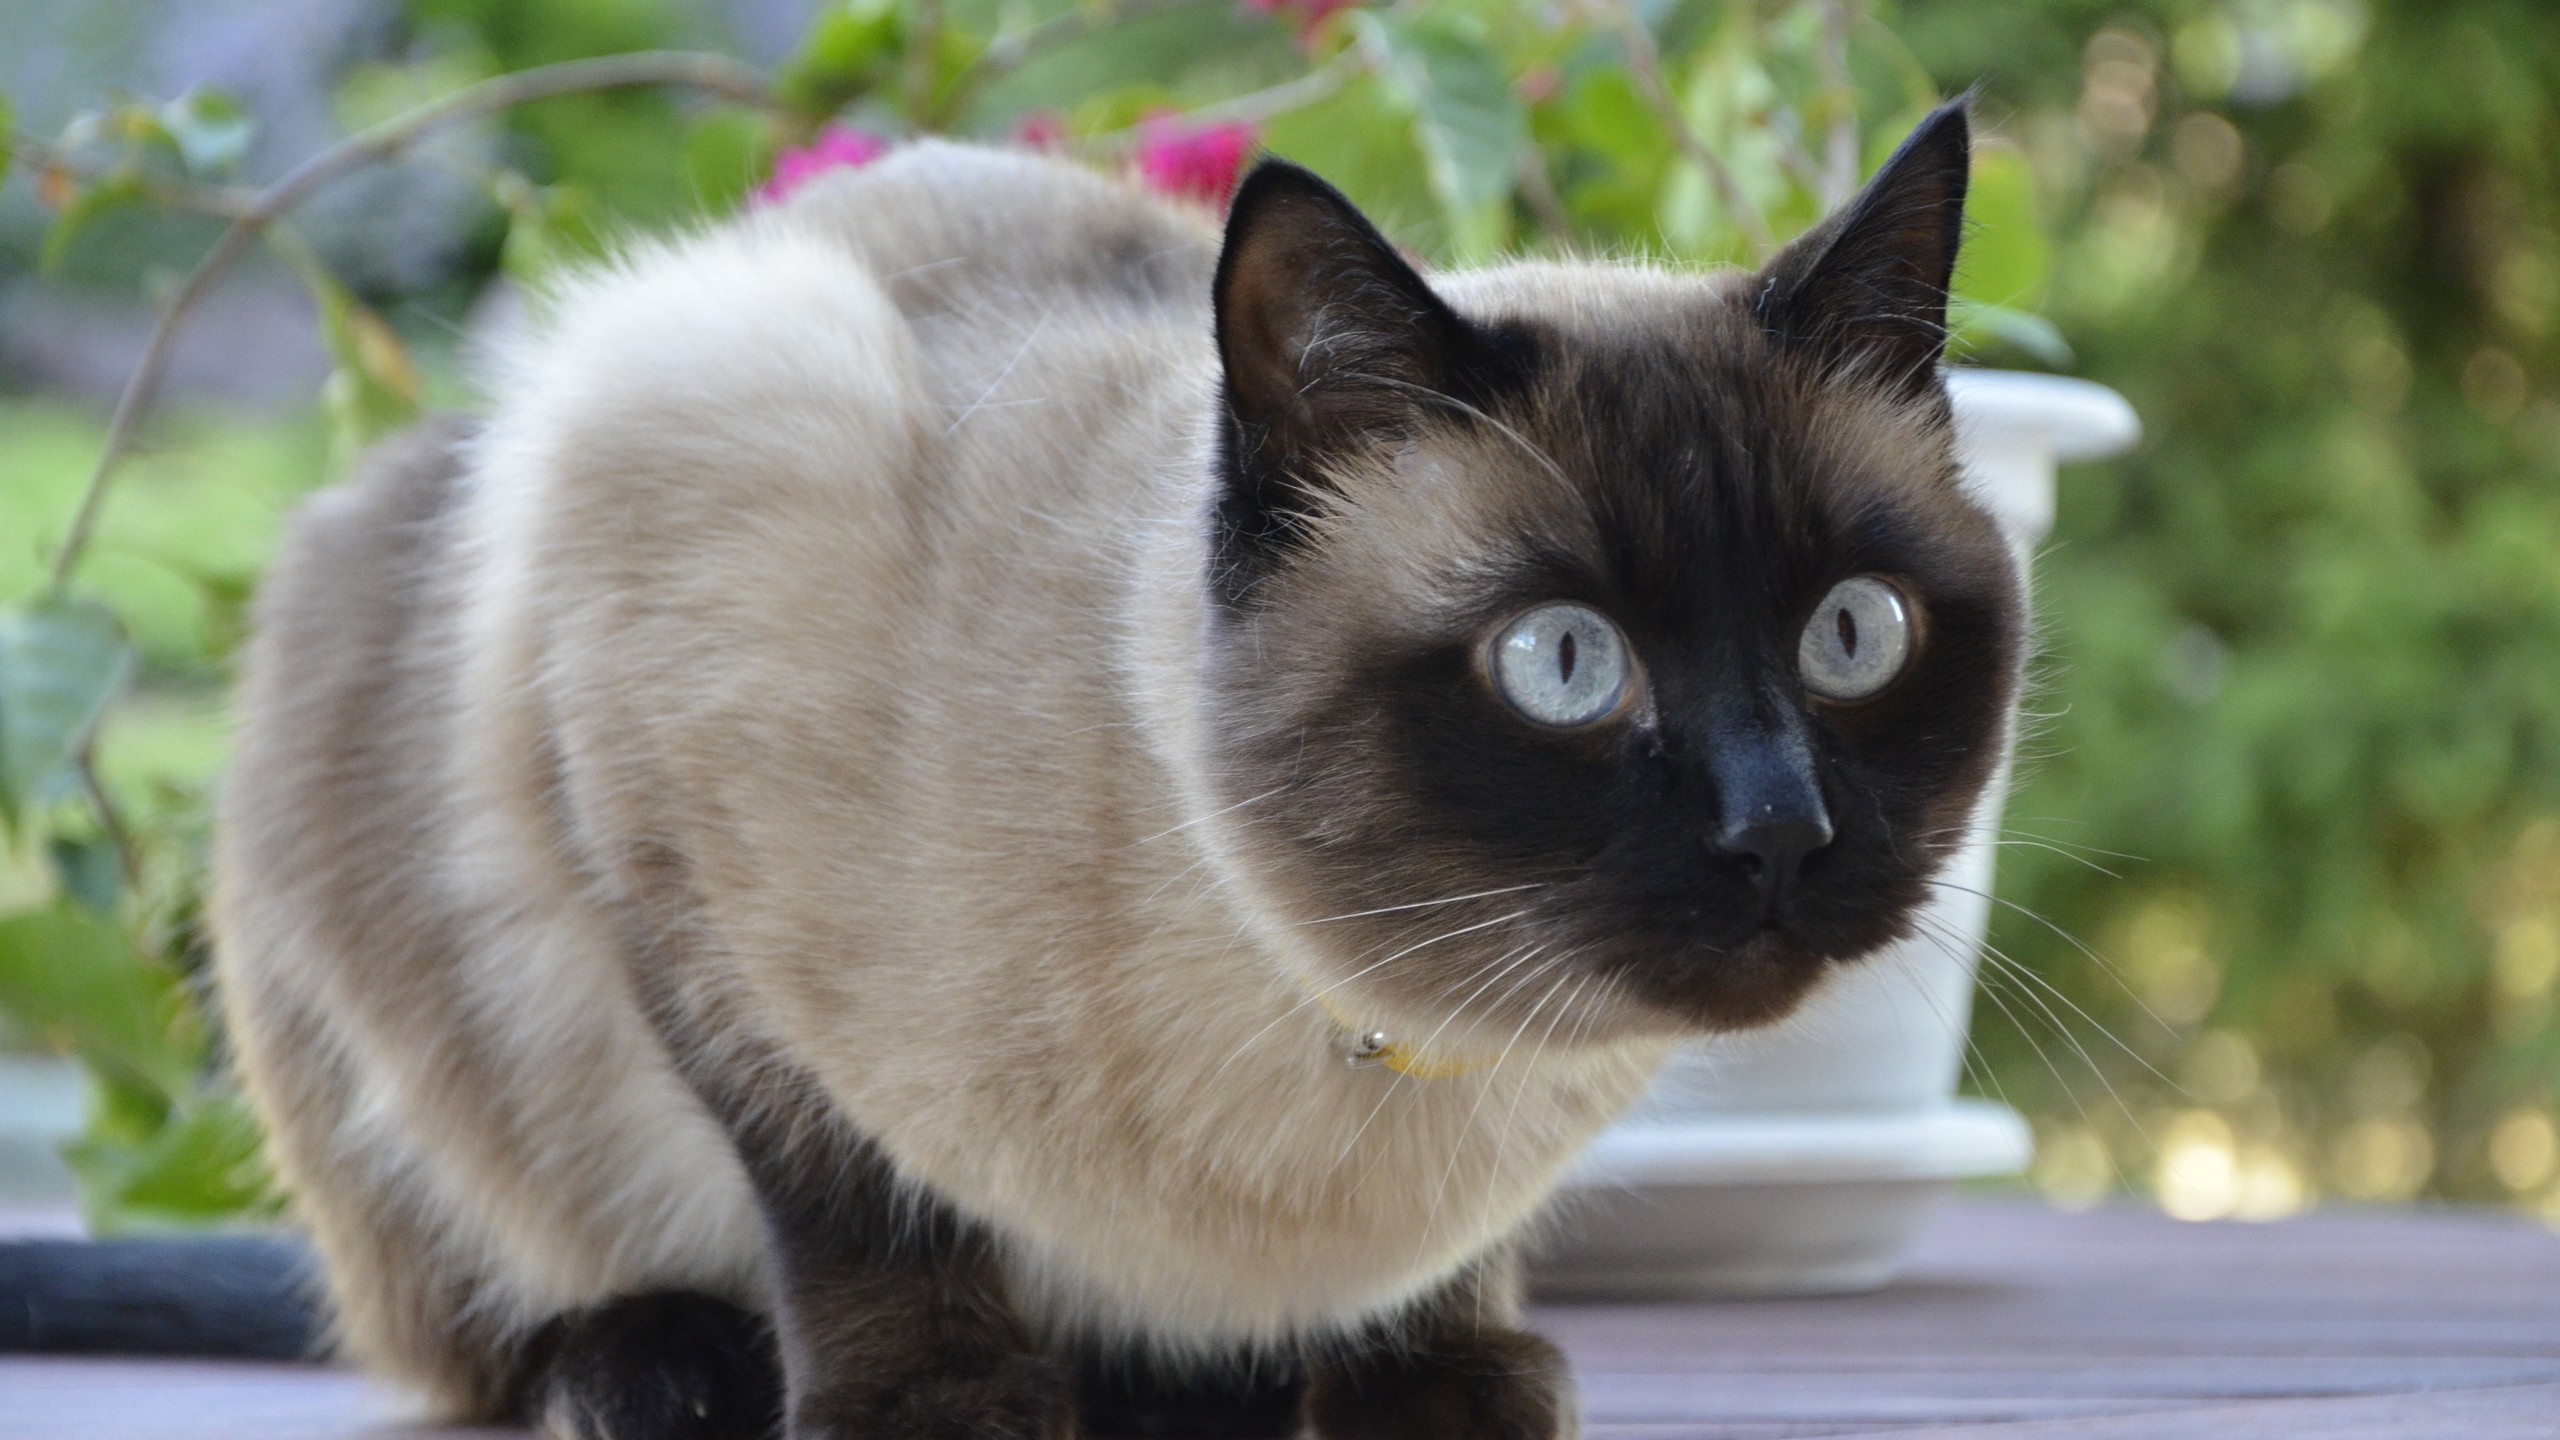 Siamese Cat for 2560x1440 HDTV resolution